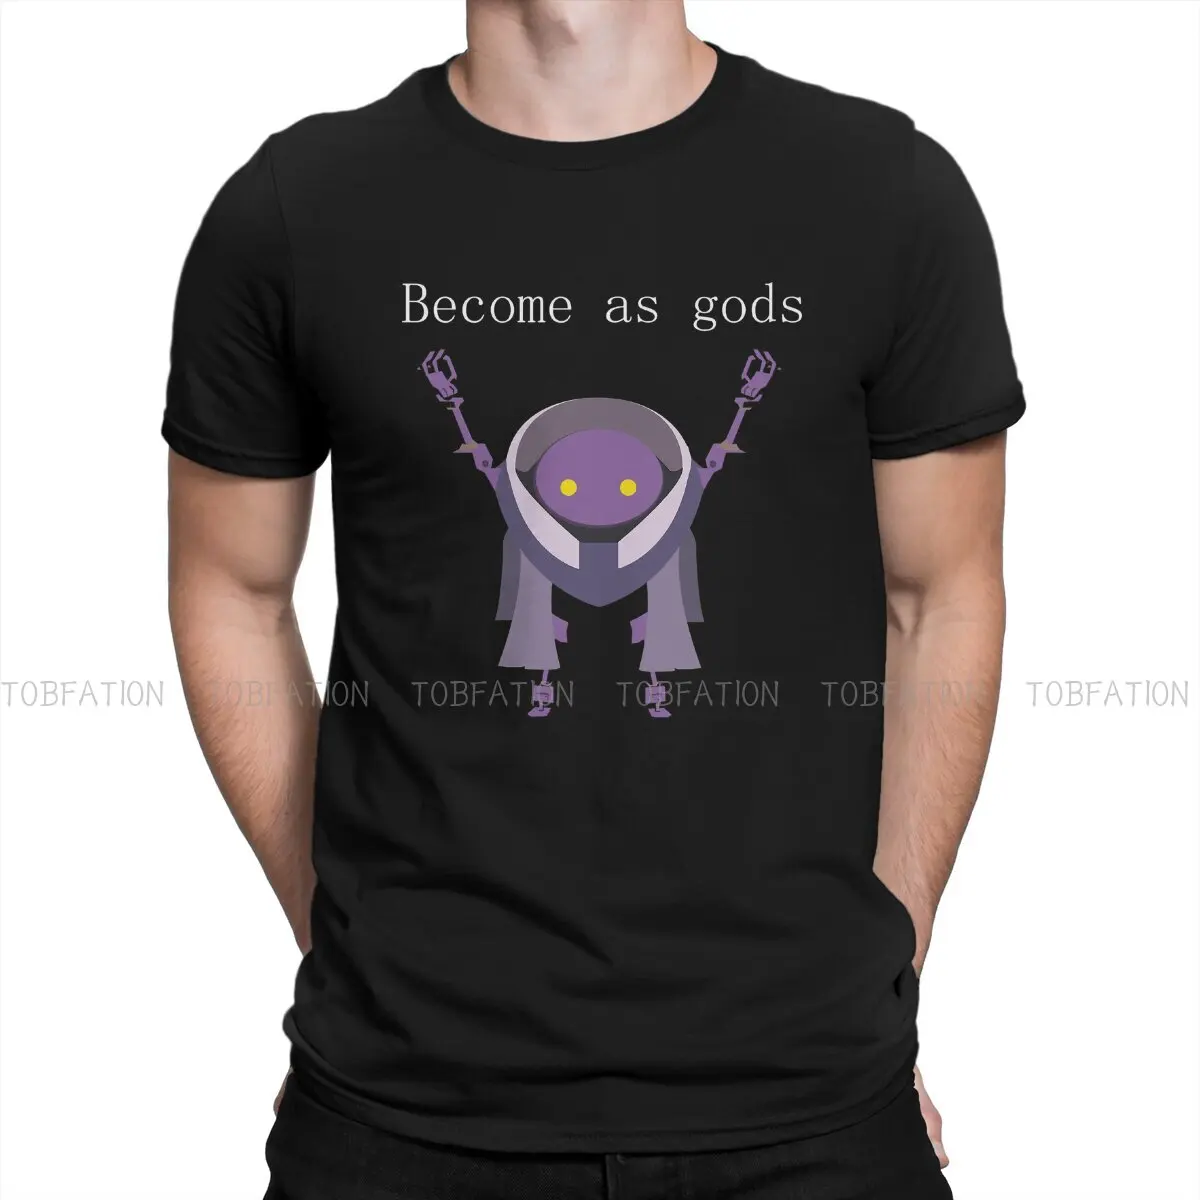 

NieR Automata Game Creative TShirt for Men Become As Gods Round Collar Pure Cotton T Shirt Hip Hop Gift Clothes Streetwear 6XL